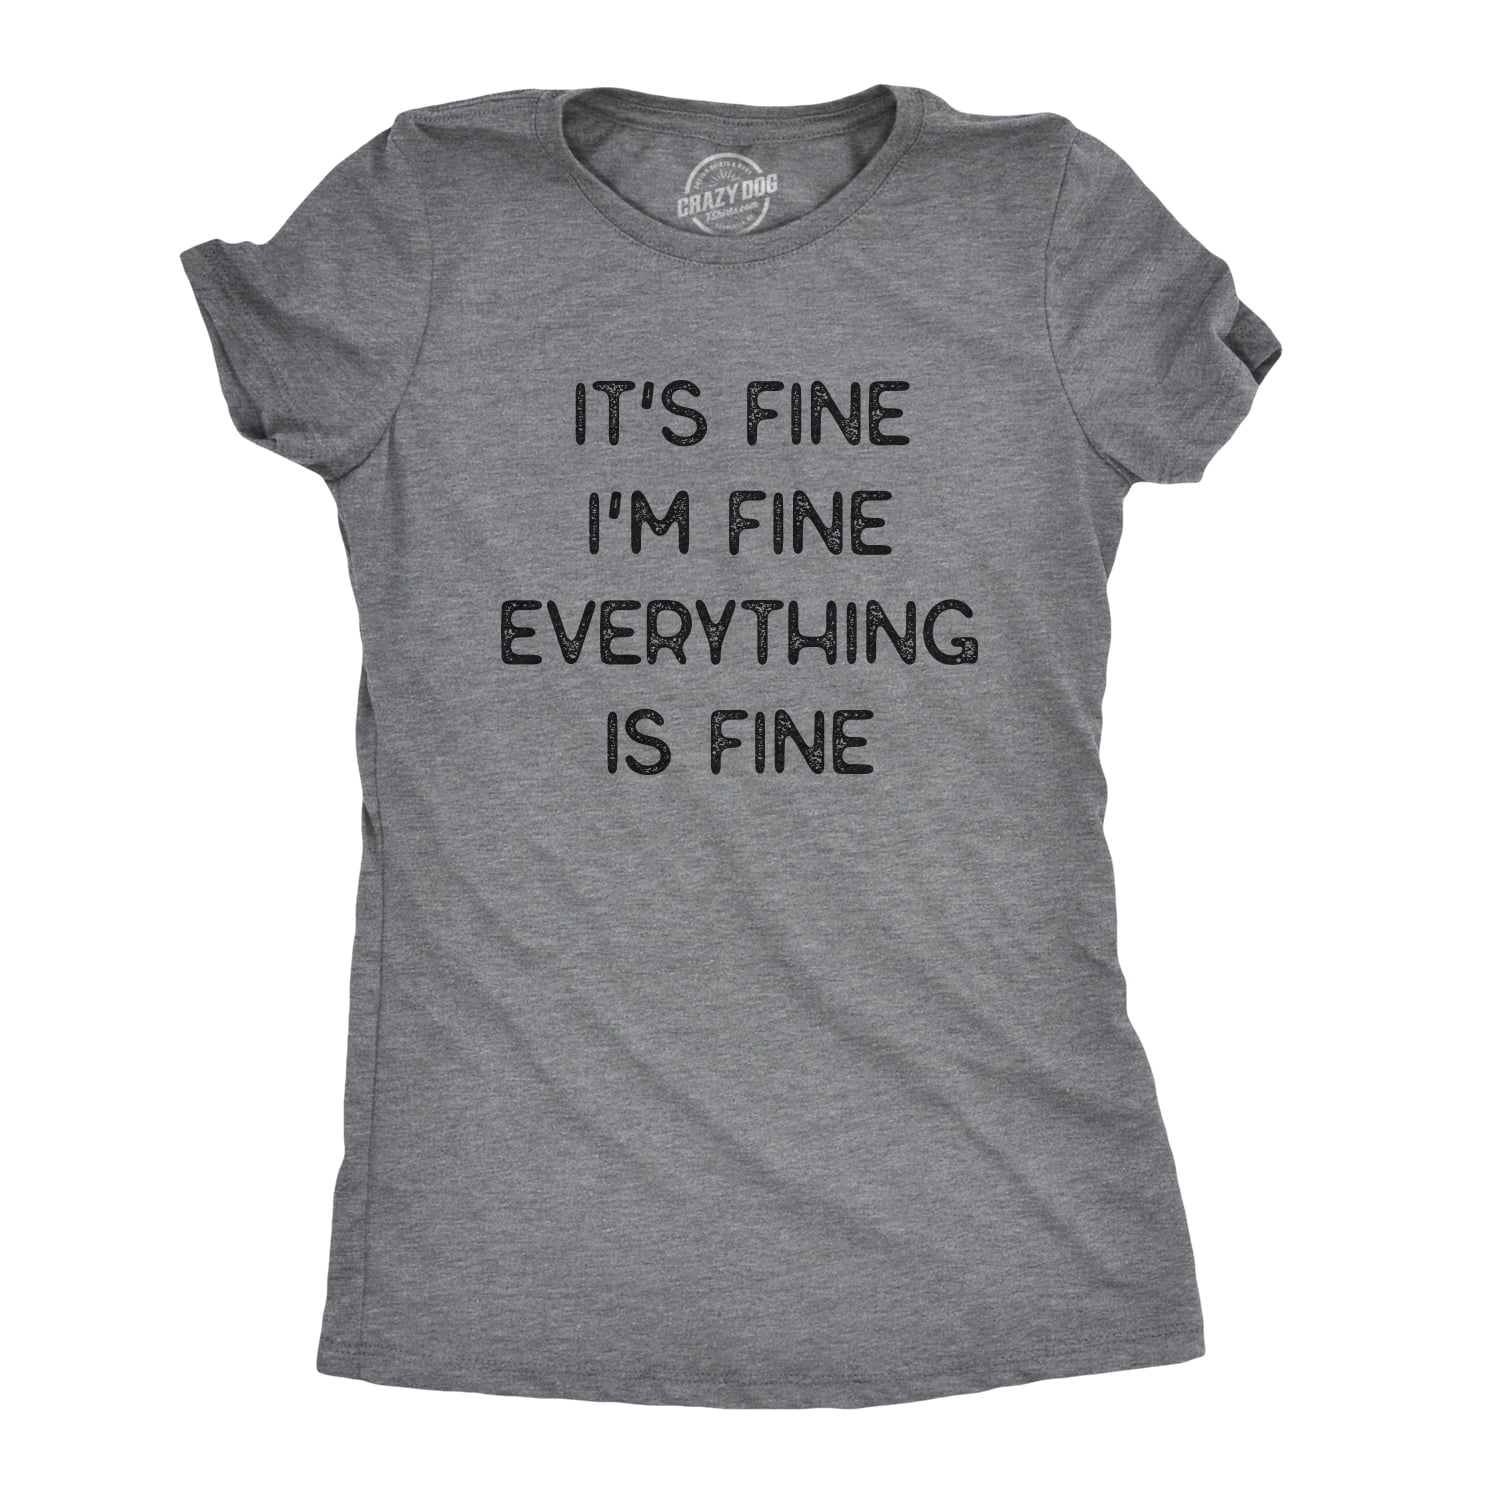 Everything Is Fine T-shirt Women Letter Print Funny Sarcastic T Shirt Short Sleeve O-Neck Summer Inspirational Tee Tops